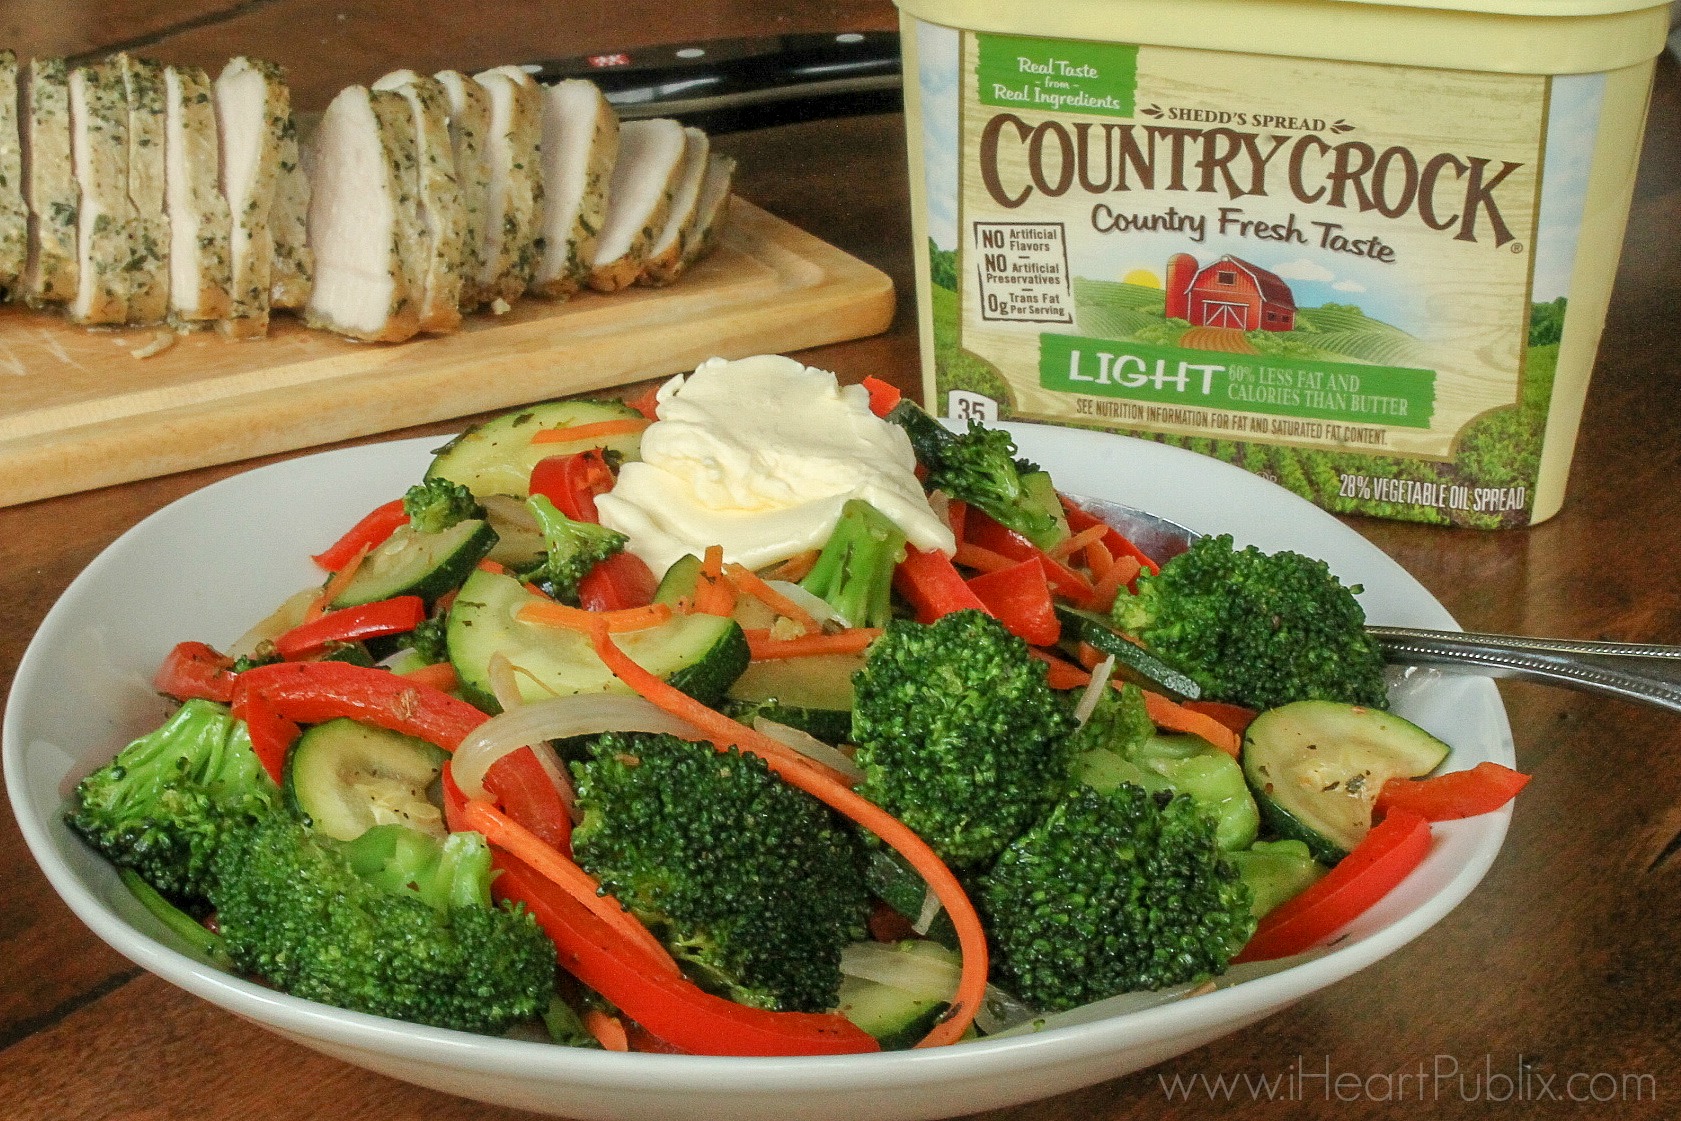 Simply Sautéed Vegetables - Serve Up Great Taste And Save $2 On Country Crock At Publix 2